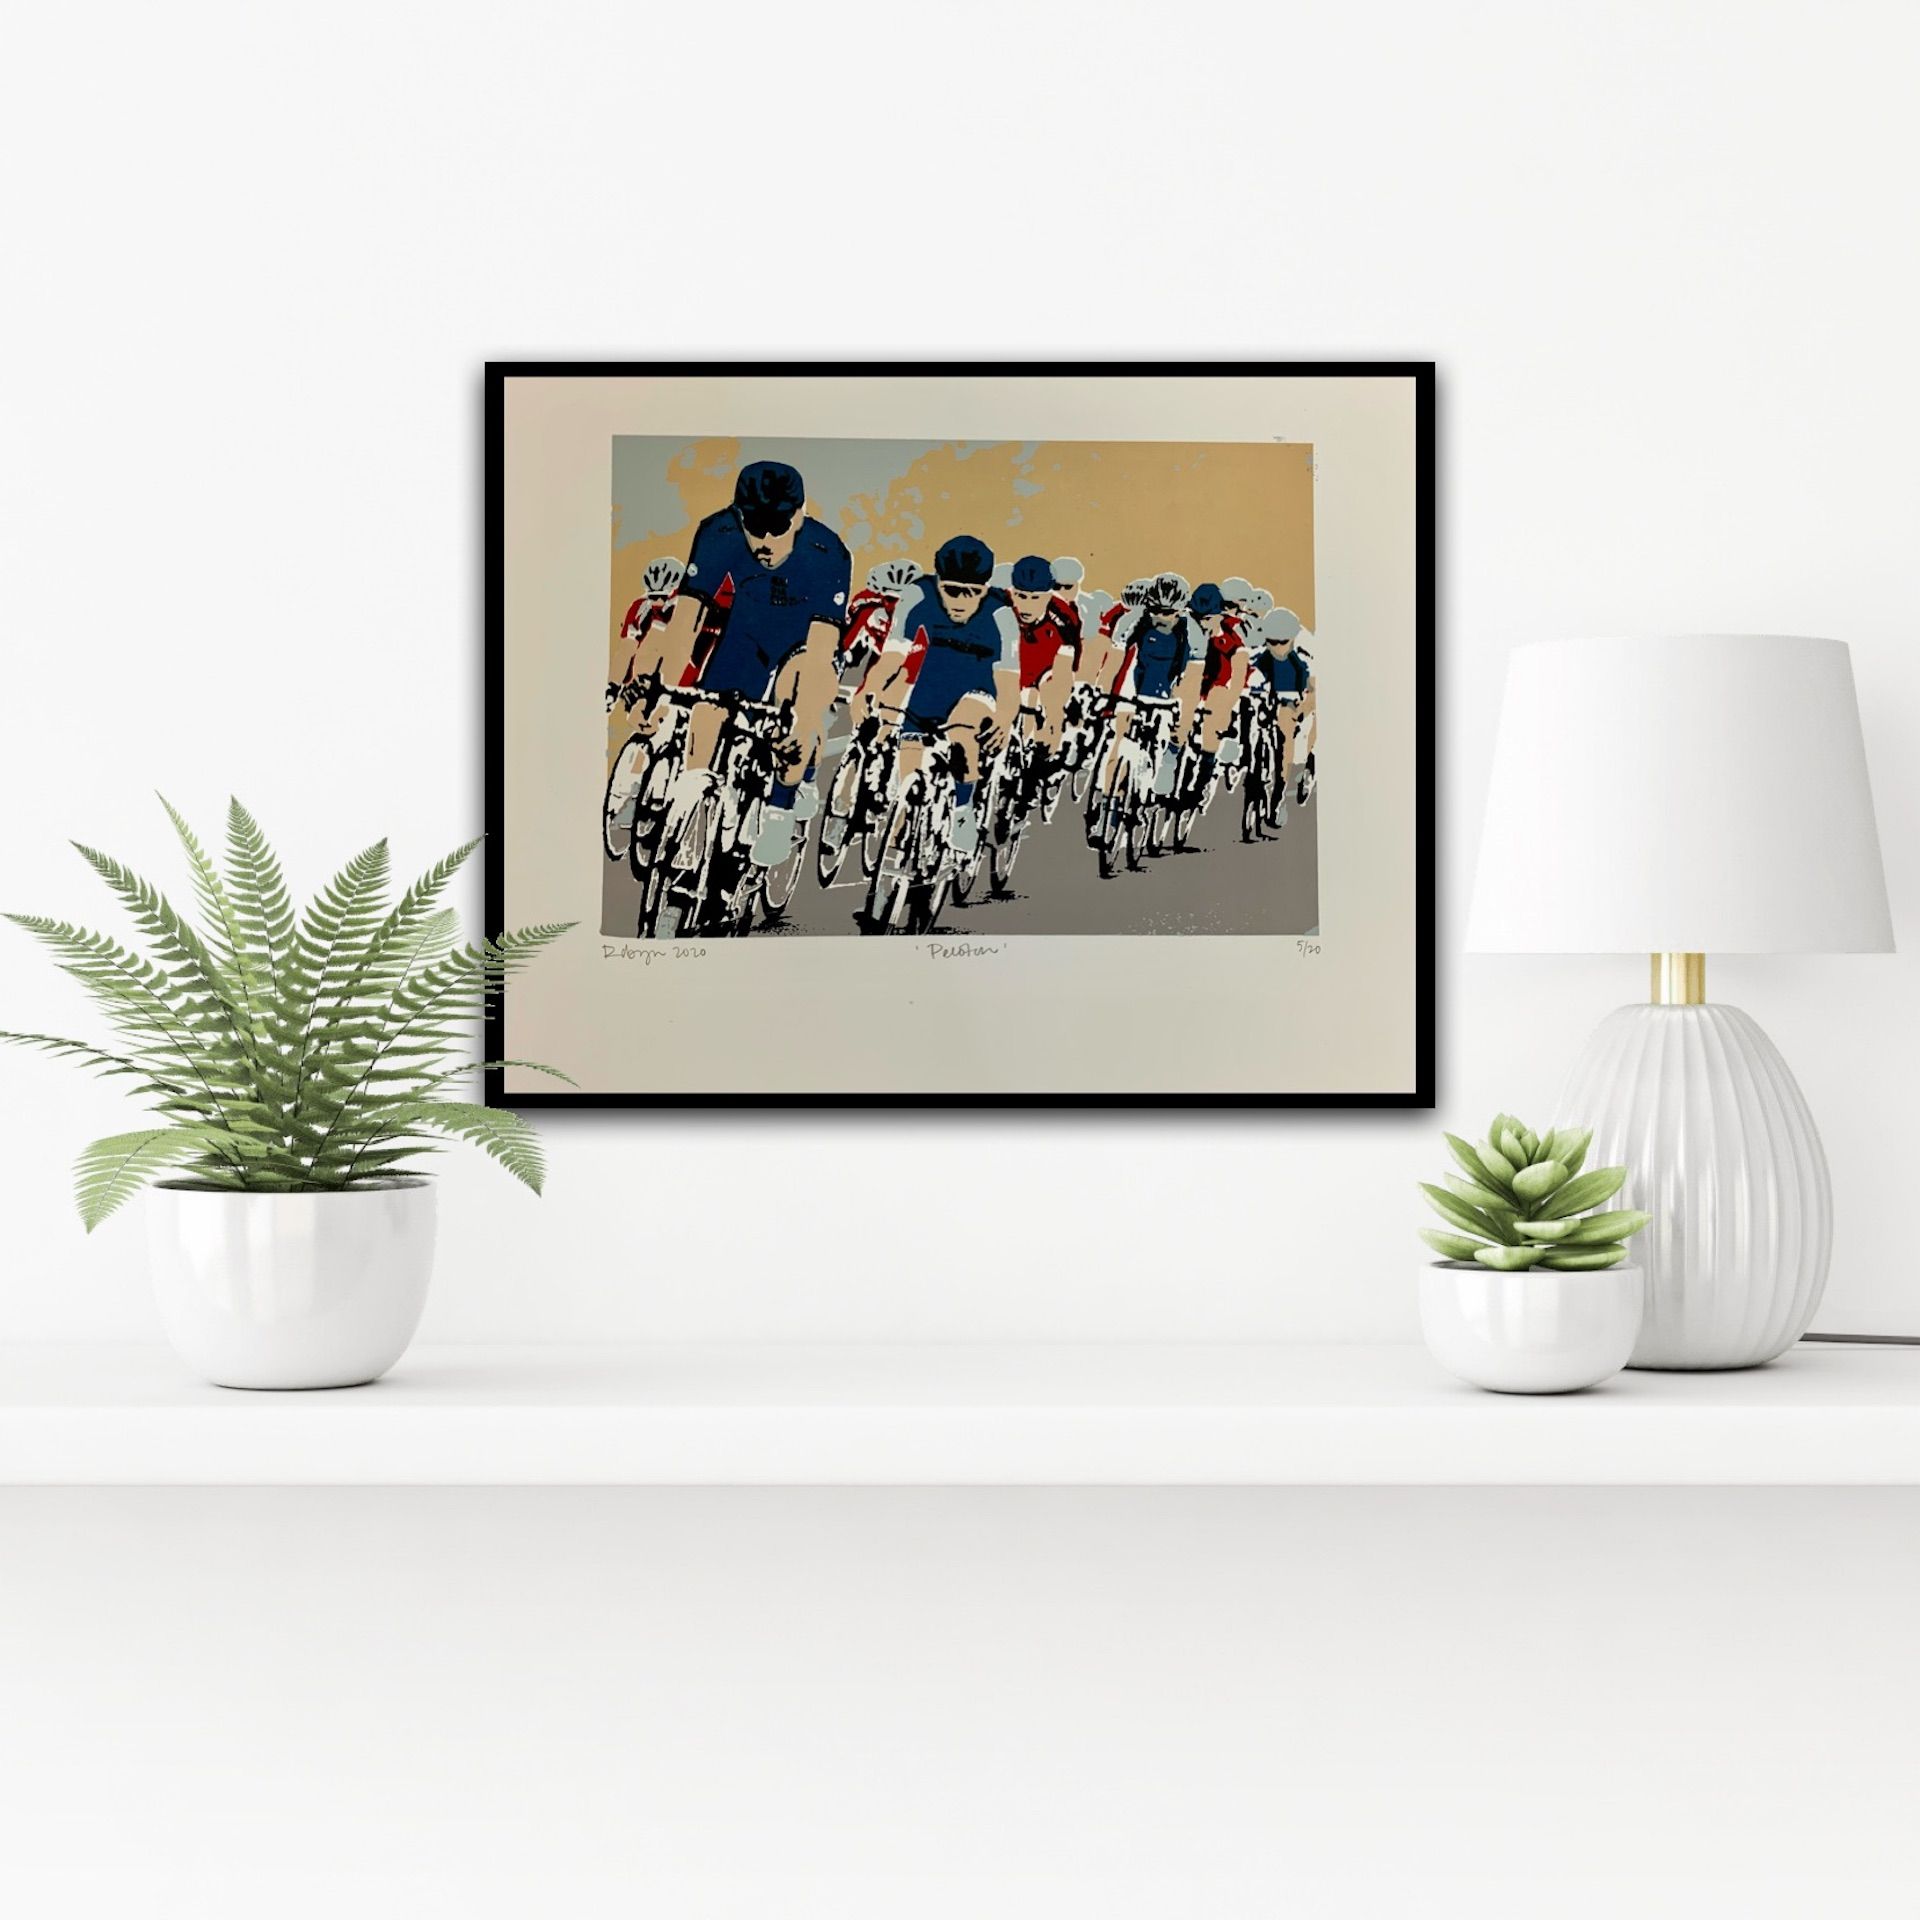 Peloton by Robyn Forbes - Secondary Image